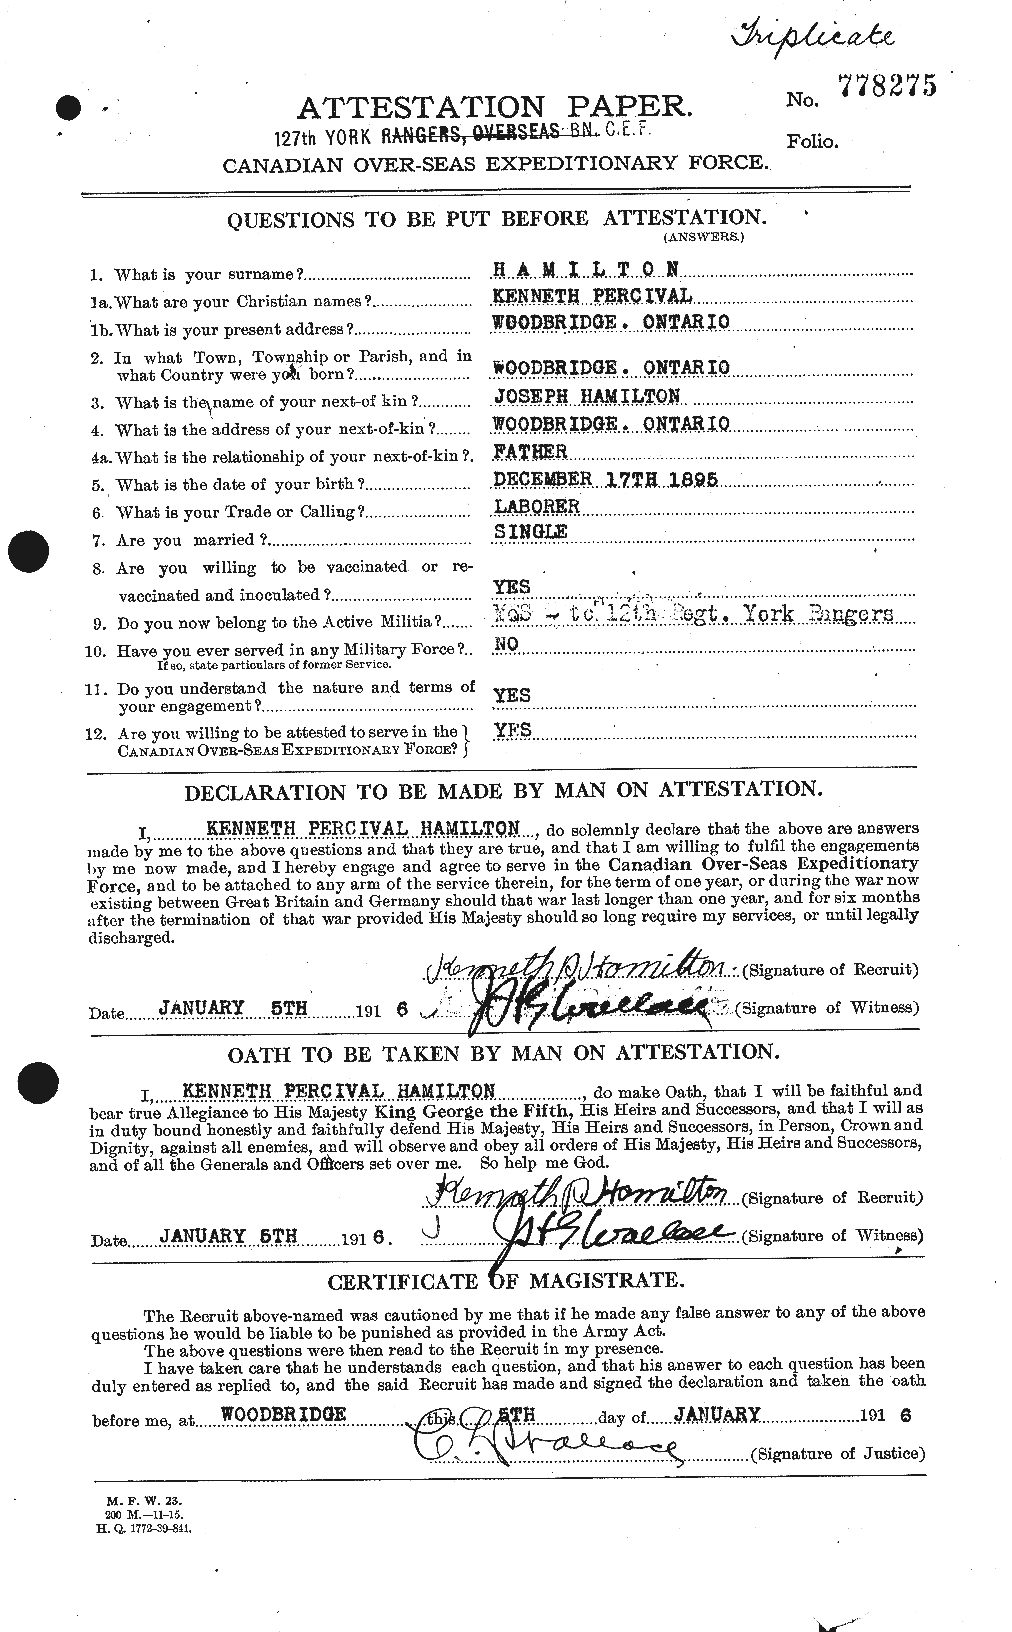 Personnel Records of the First World War - CEF 373152a